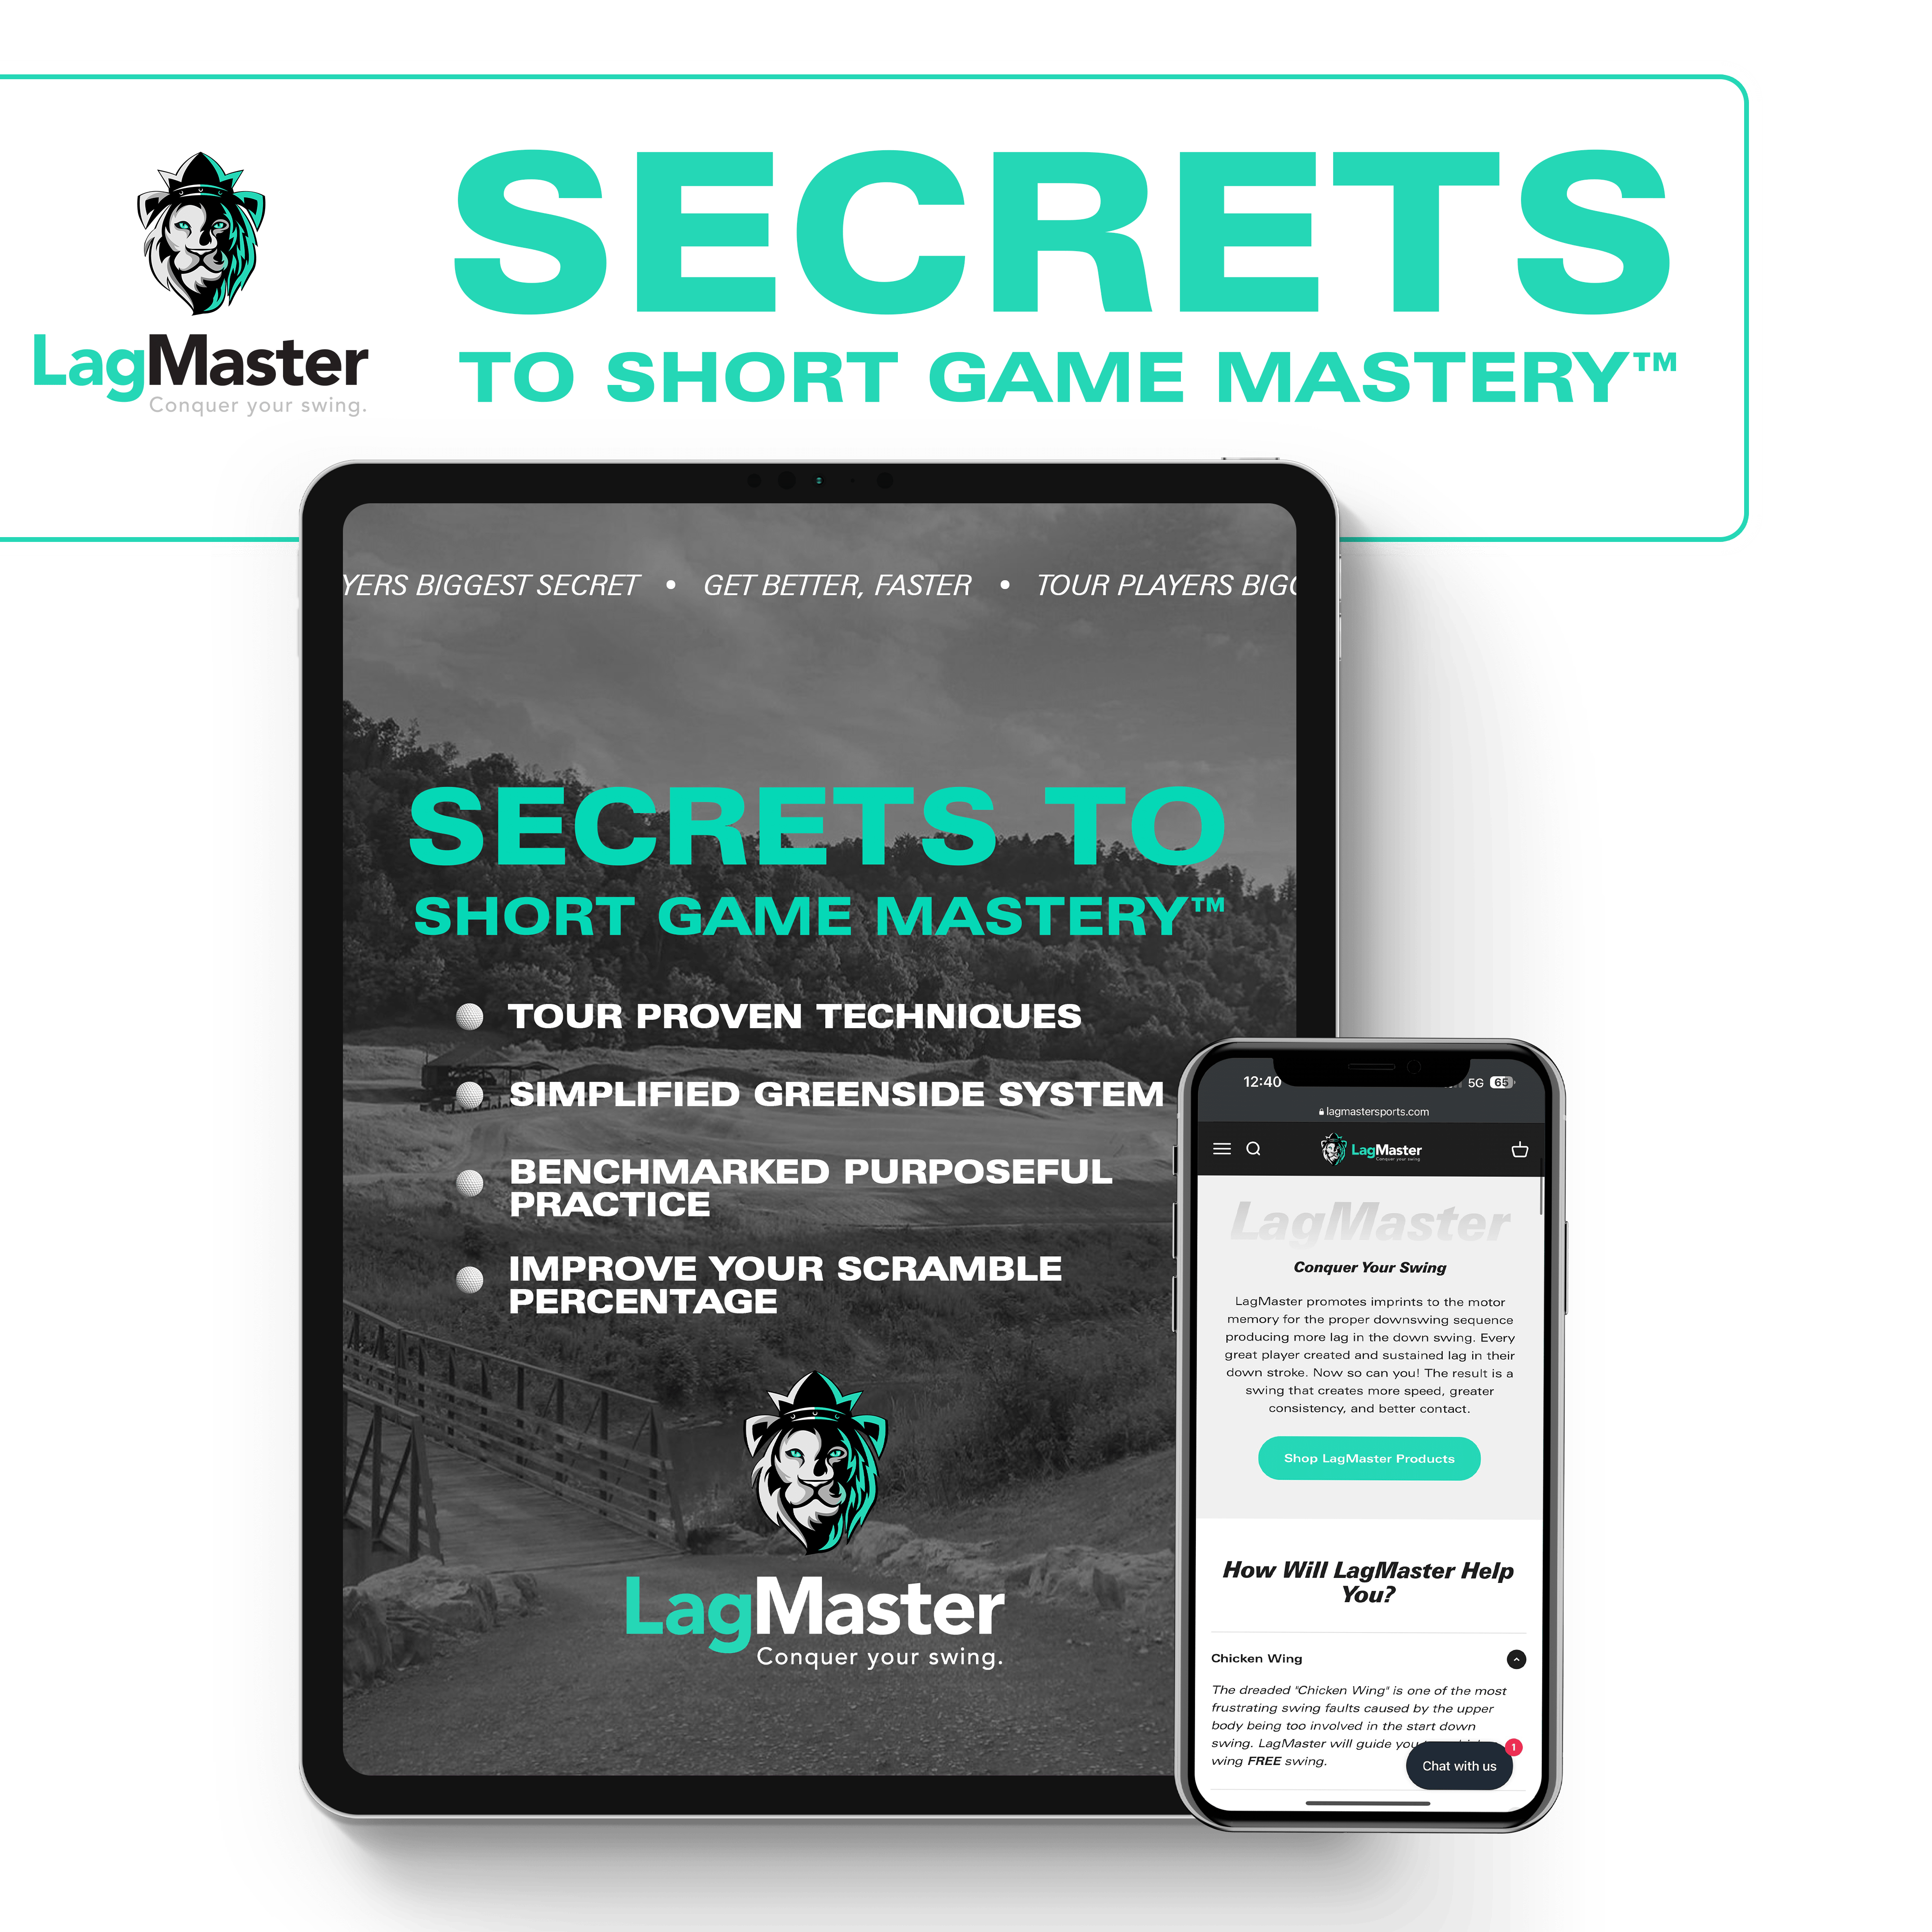 Secrets to Short Game Mastery™